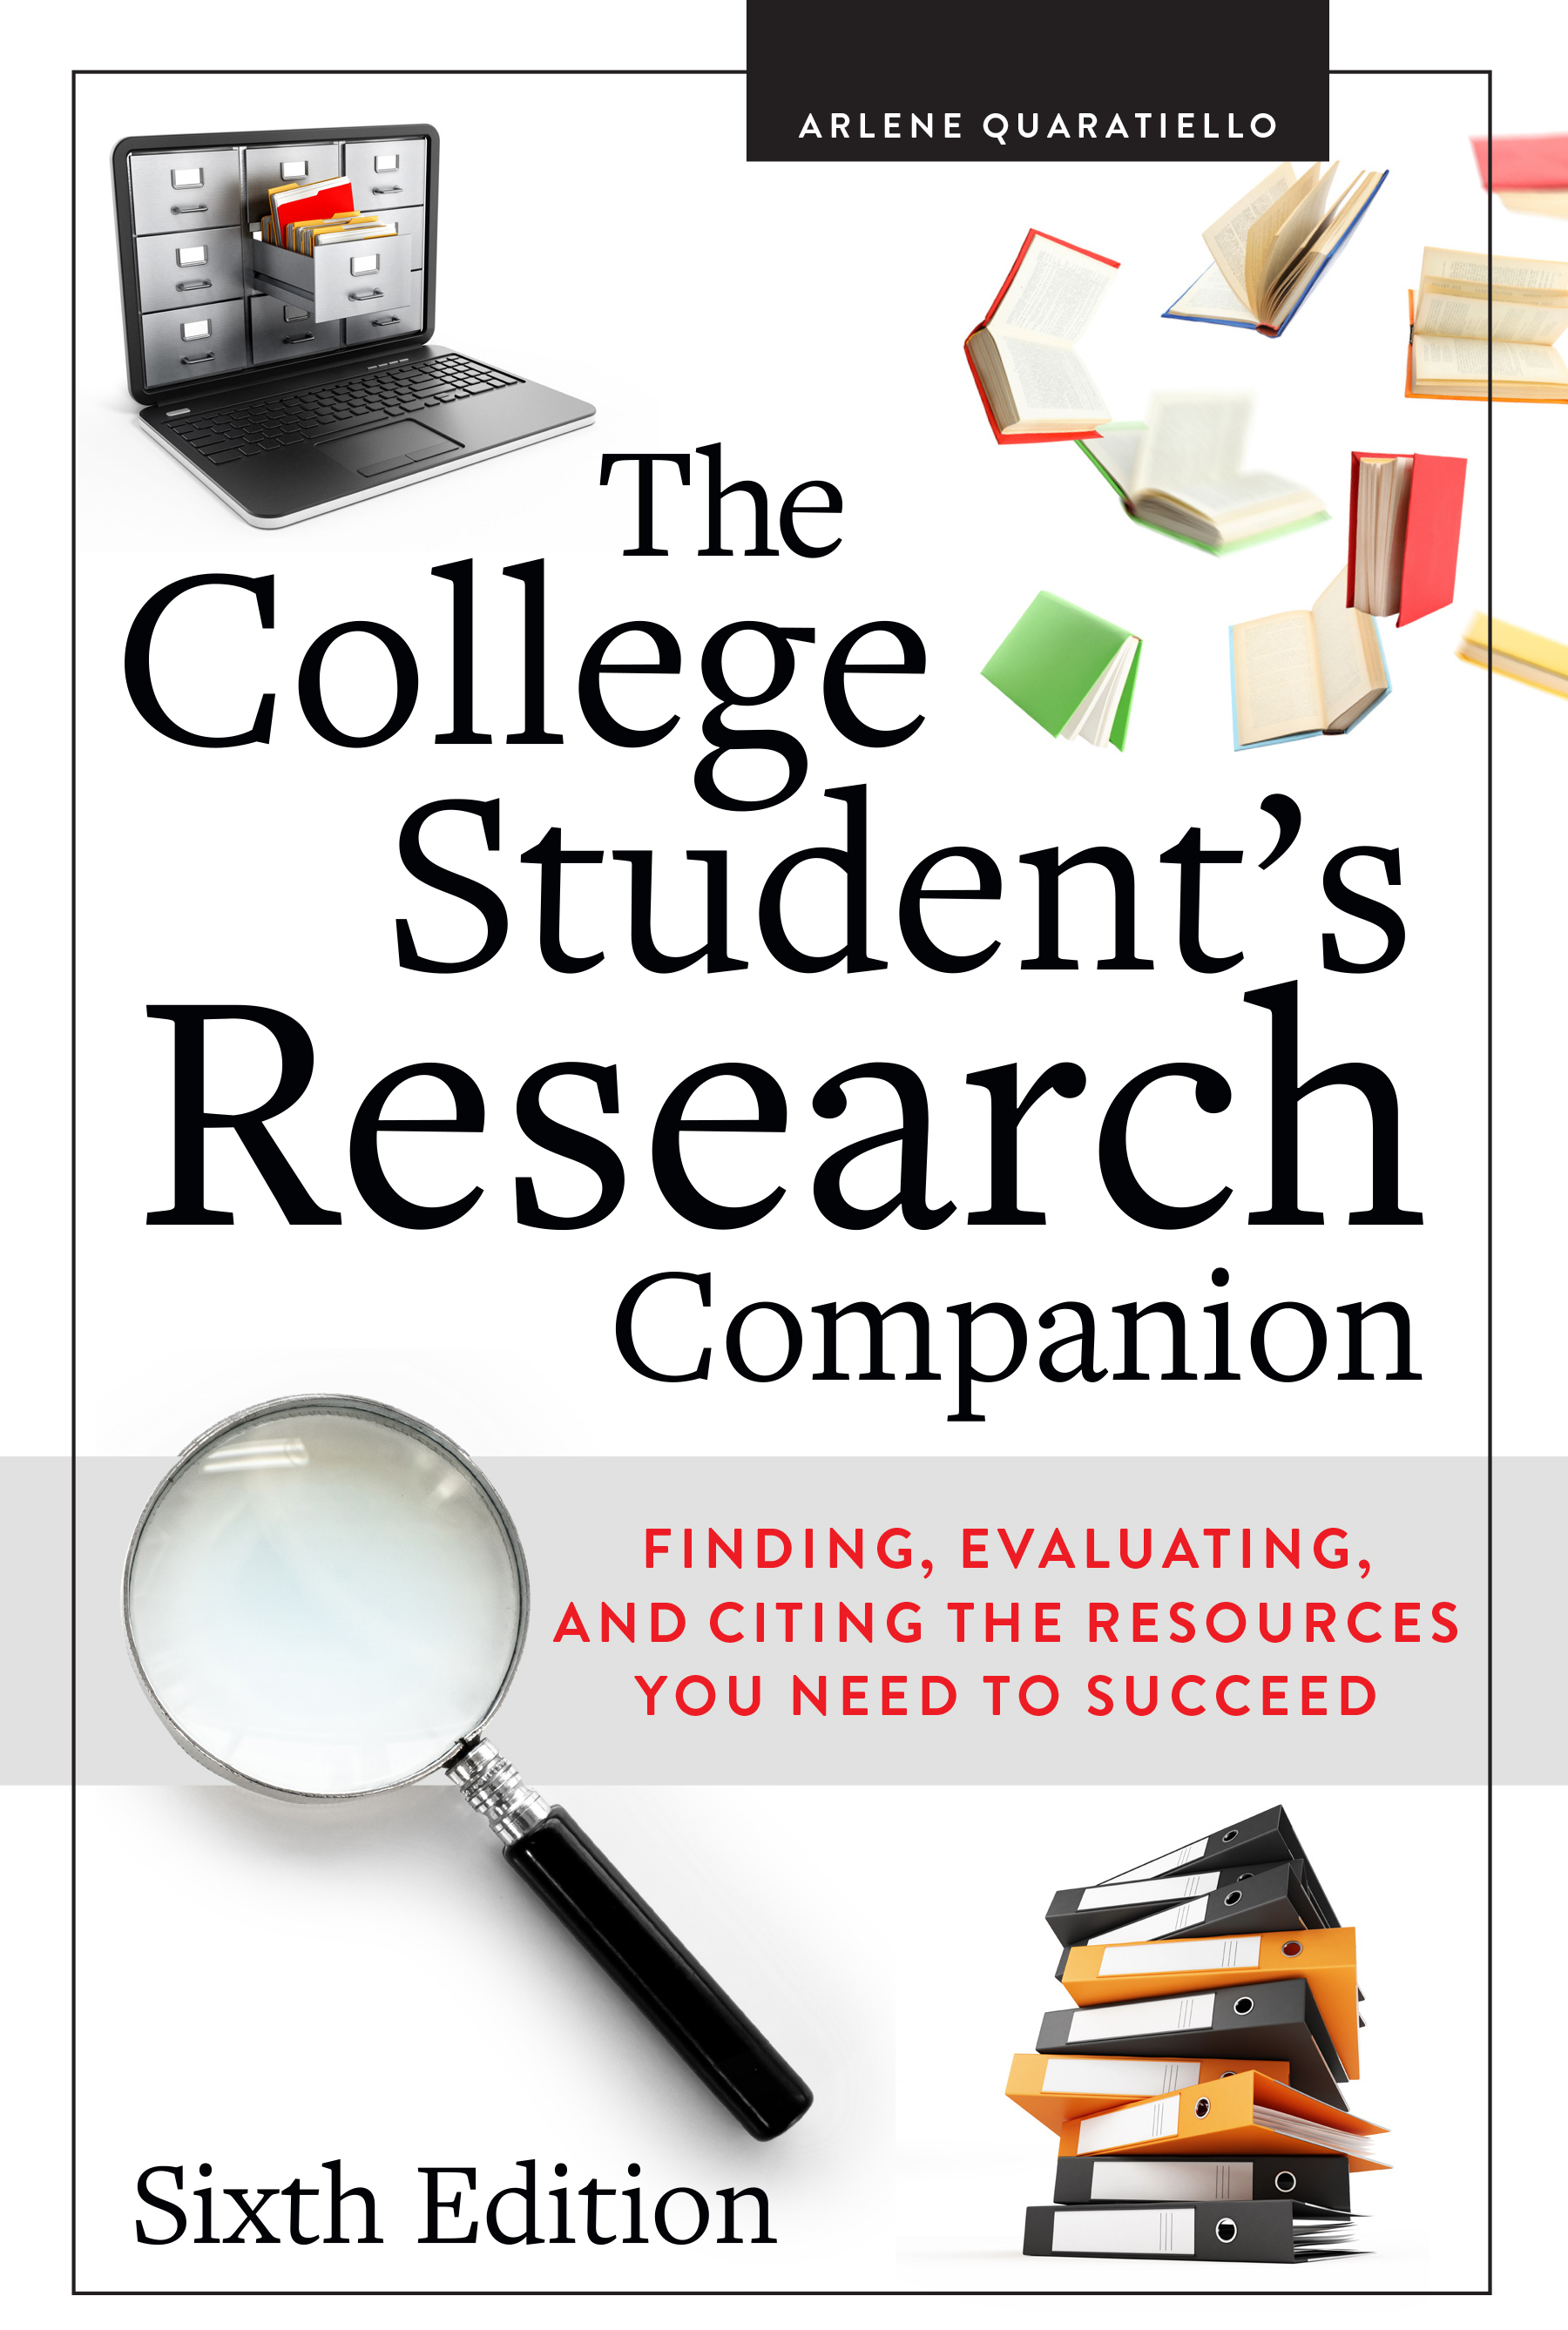 Image for The College Student’s Research Companion: Finding, Evaluating, and Citing the Resources You Need to Succeed, Sixth Edition